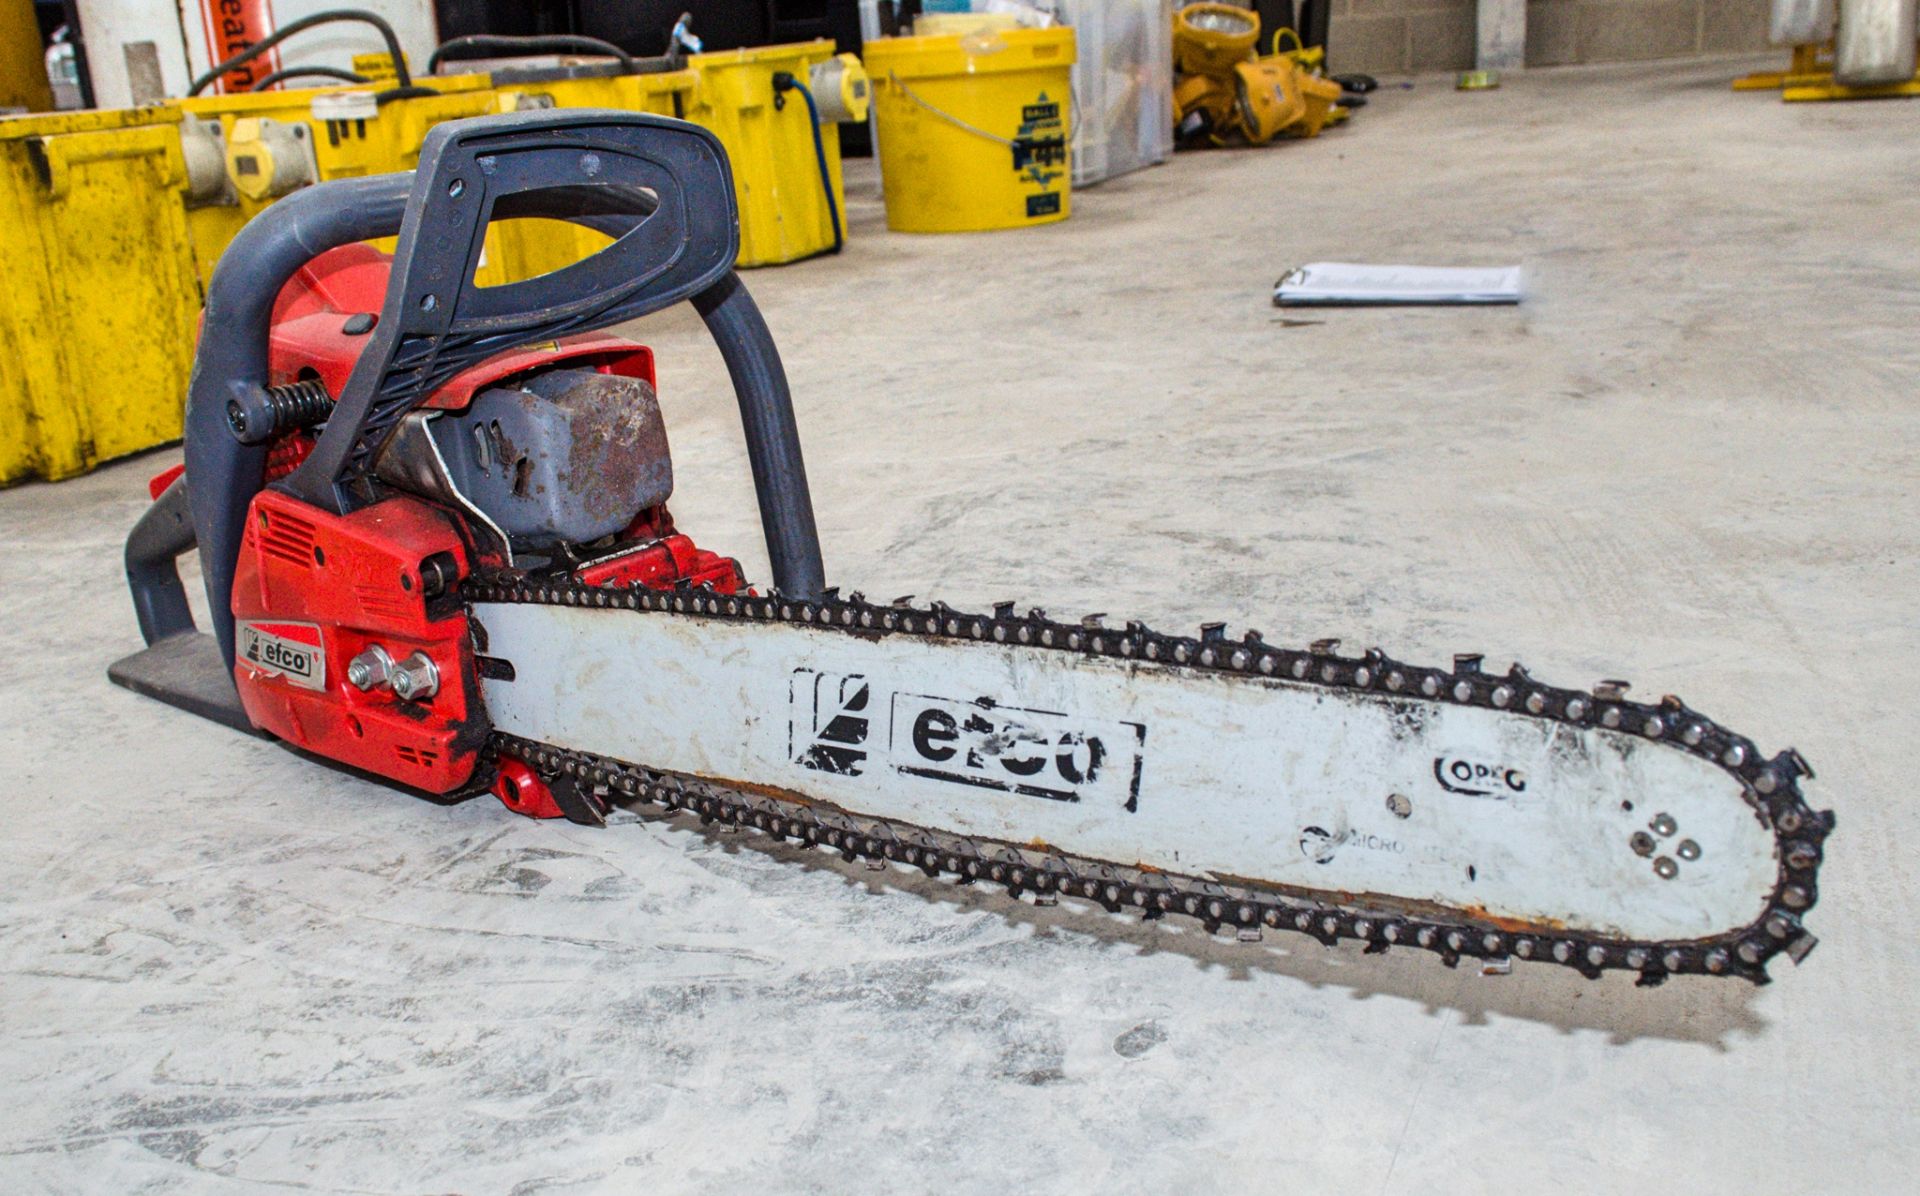 Efco MT4400 petrol driven chainsaw - Image 2 of 2